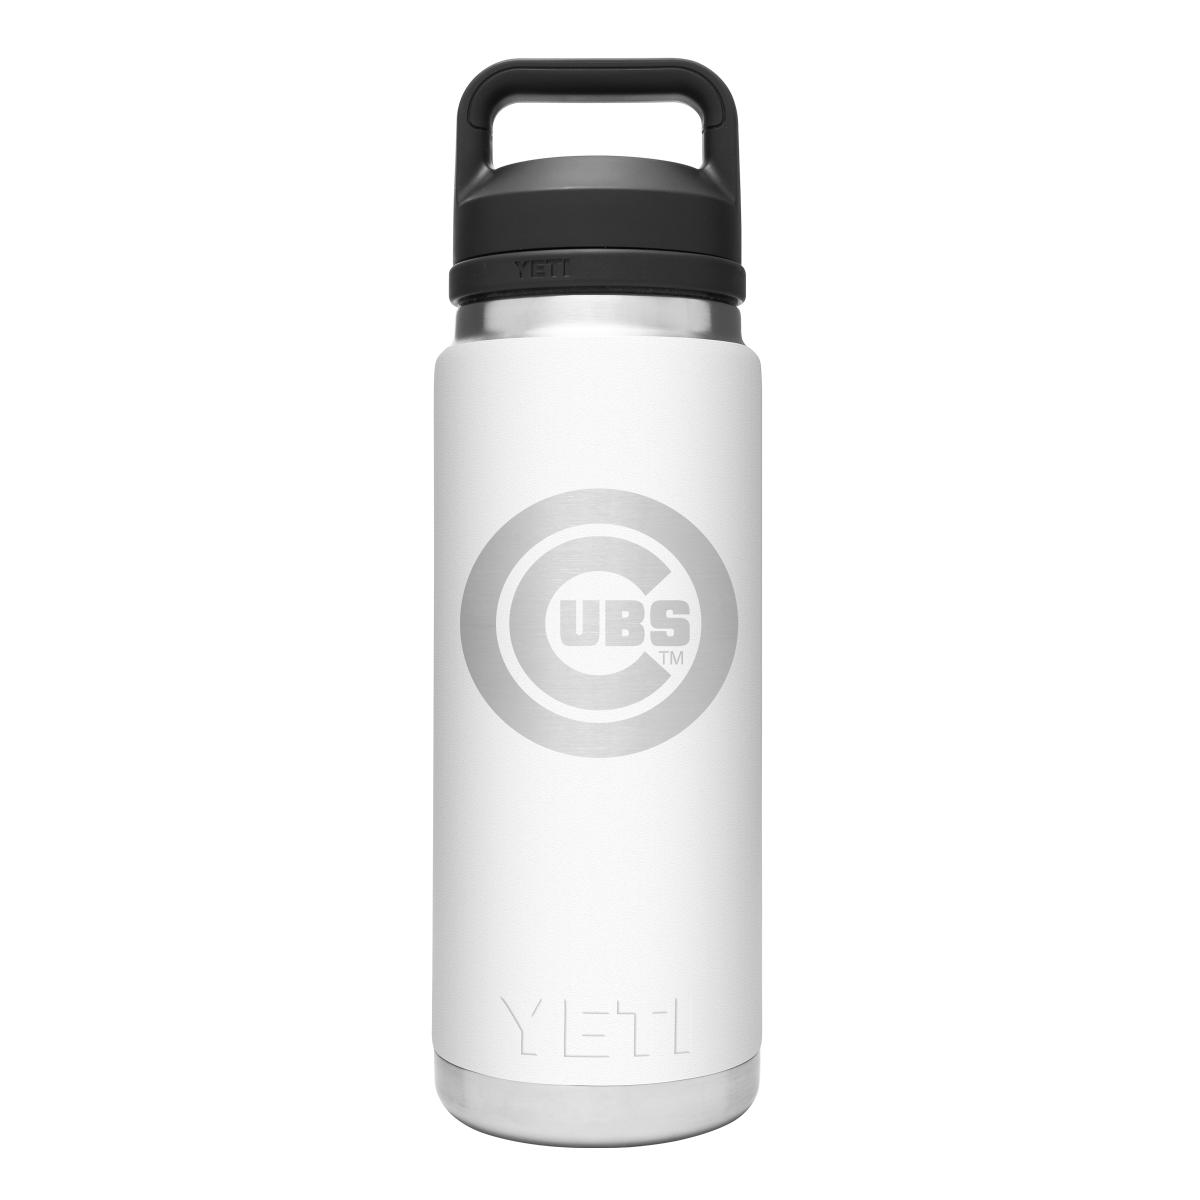 Chicago Cubs Rambler 26 Oz Bottle with Chug Cap from YETI - $50.00